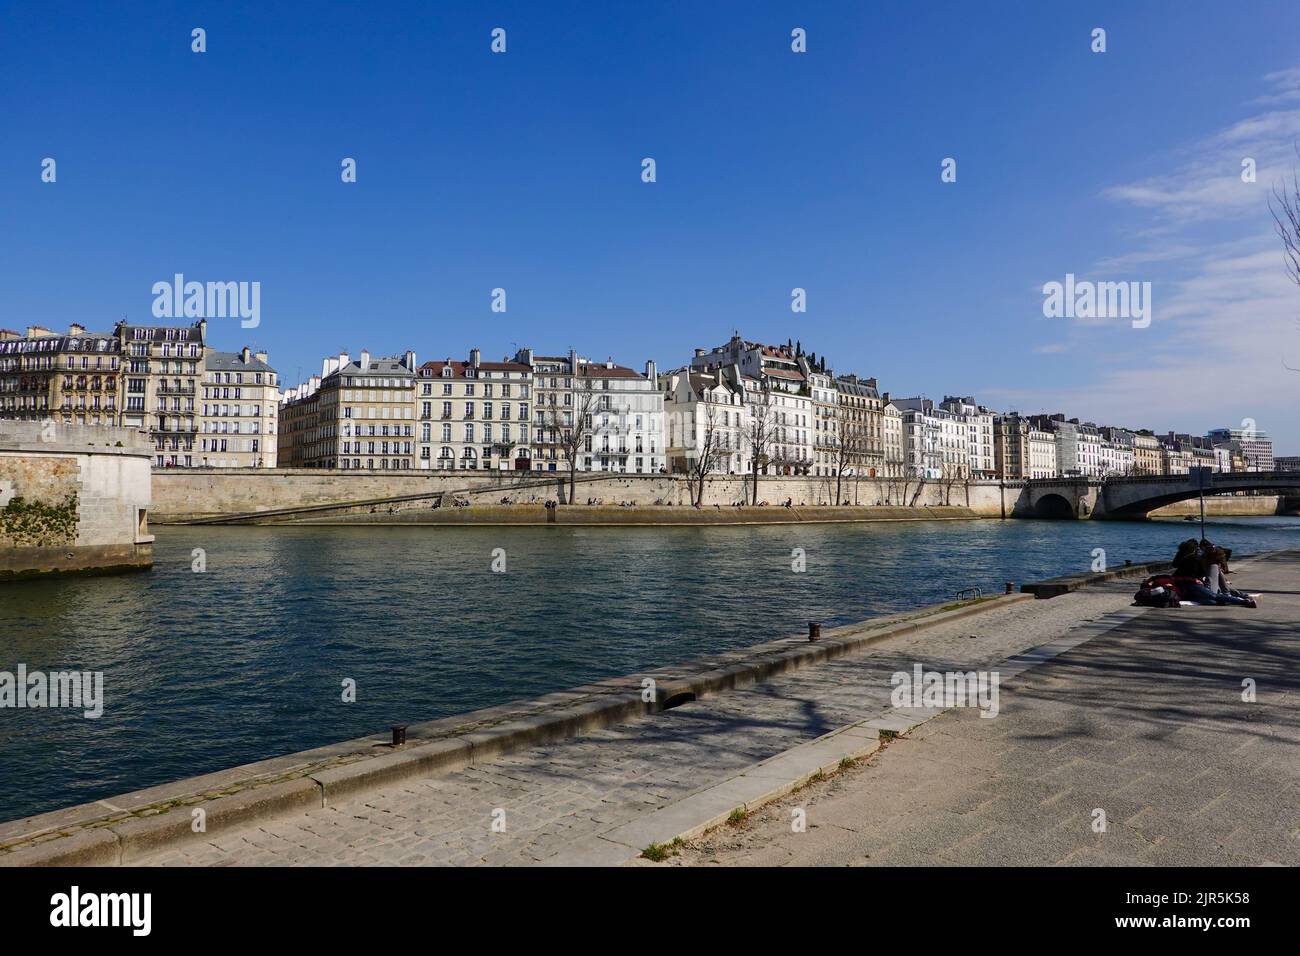 Looking from the Quai Saint Bernard in the 5th arrondissement, across the Seine River on a warm, clear spring day, Paris, France. Stock Photo